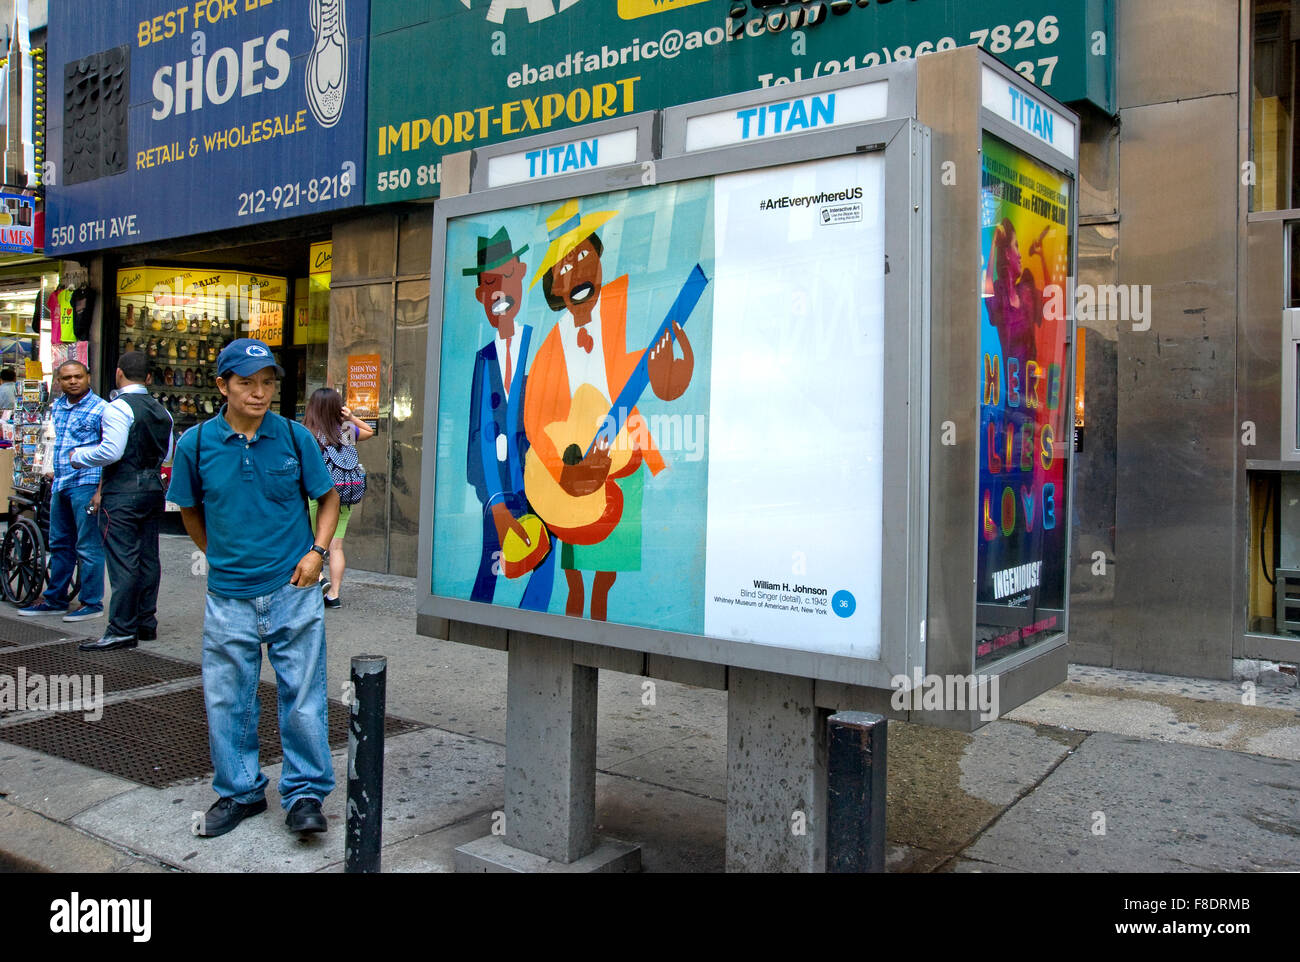 Fine Art painting by William H. Johnson is reproduced on outdoor advertising panel in New York city during the Art Everywhere event. Stock Photo